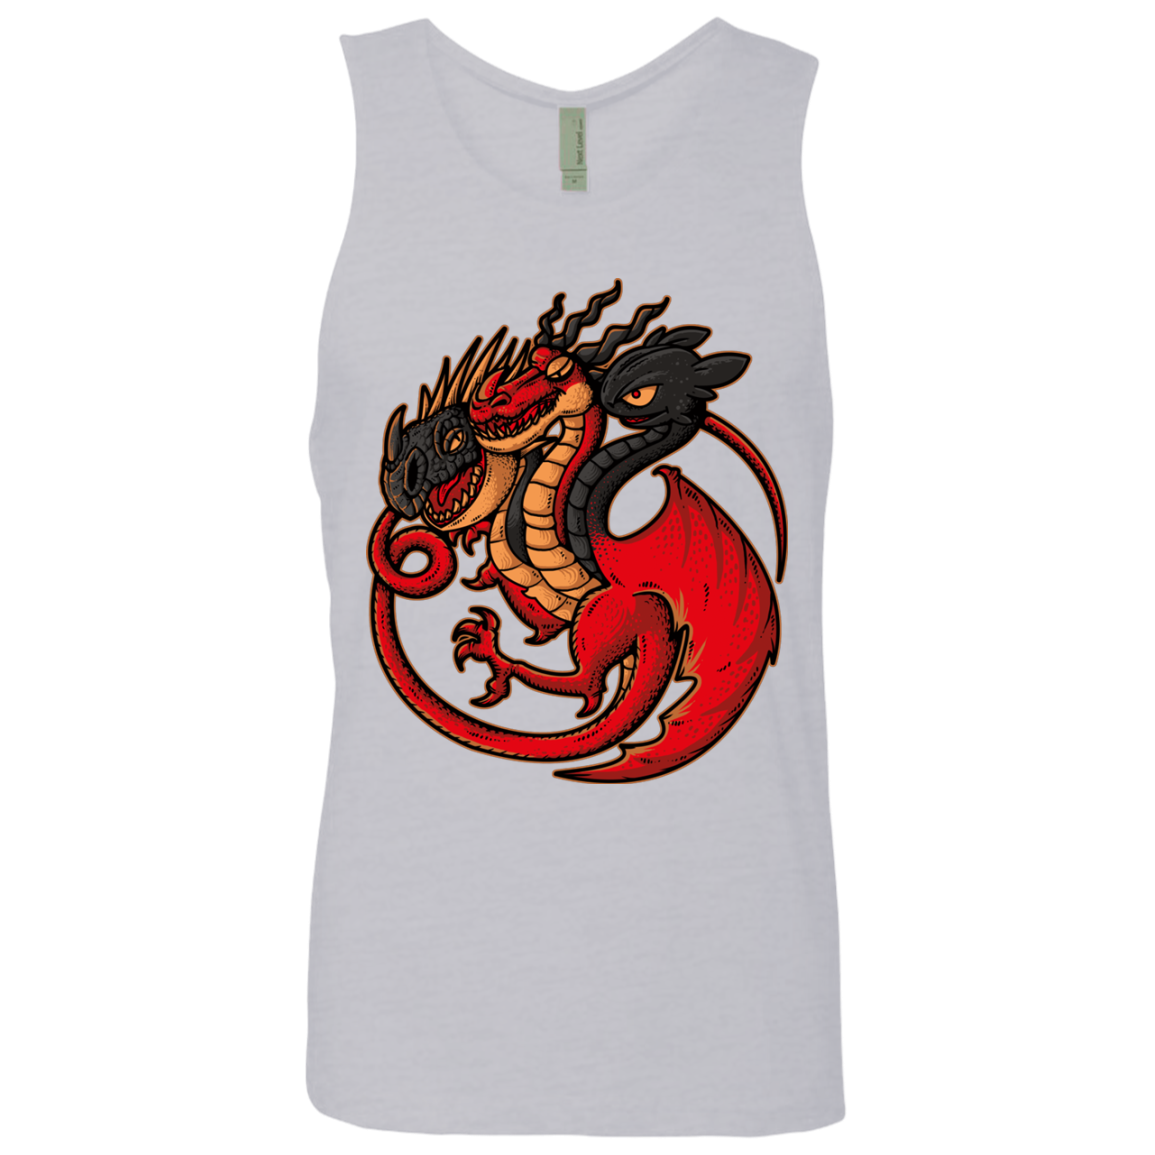 FIRE BLOOD AND TRAINING Men's Premium Tank Top